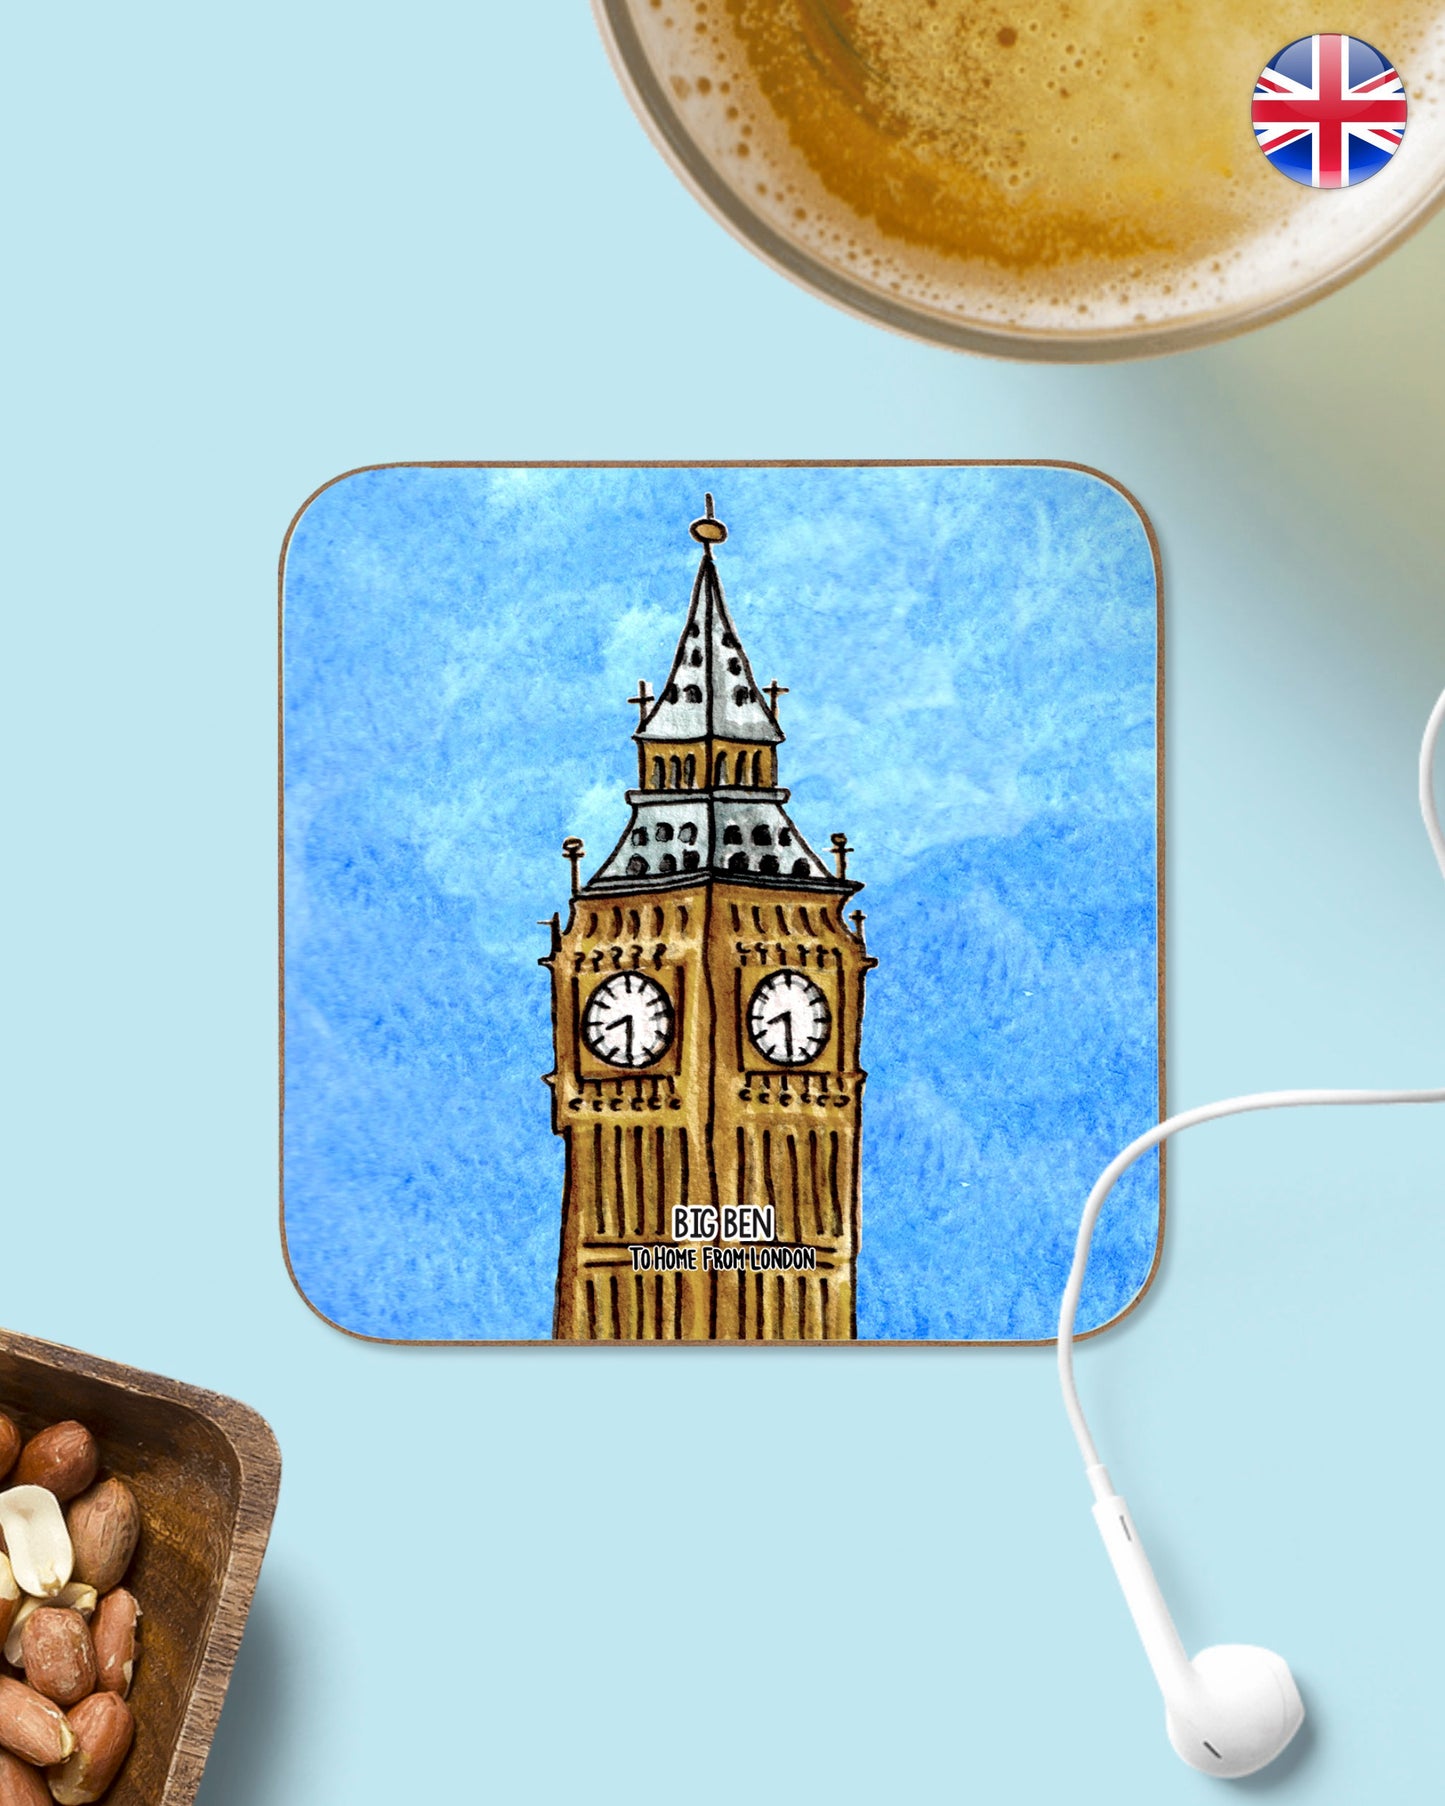 London Landmarks Coasters - To Home From London